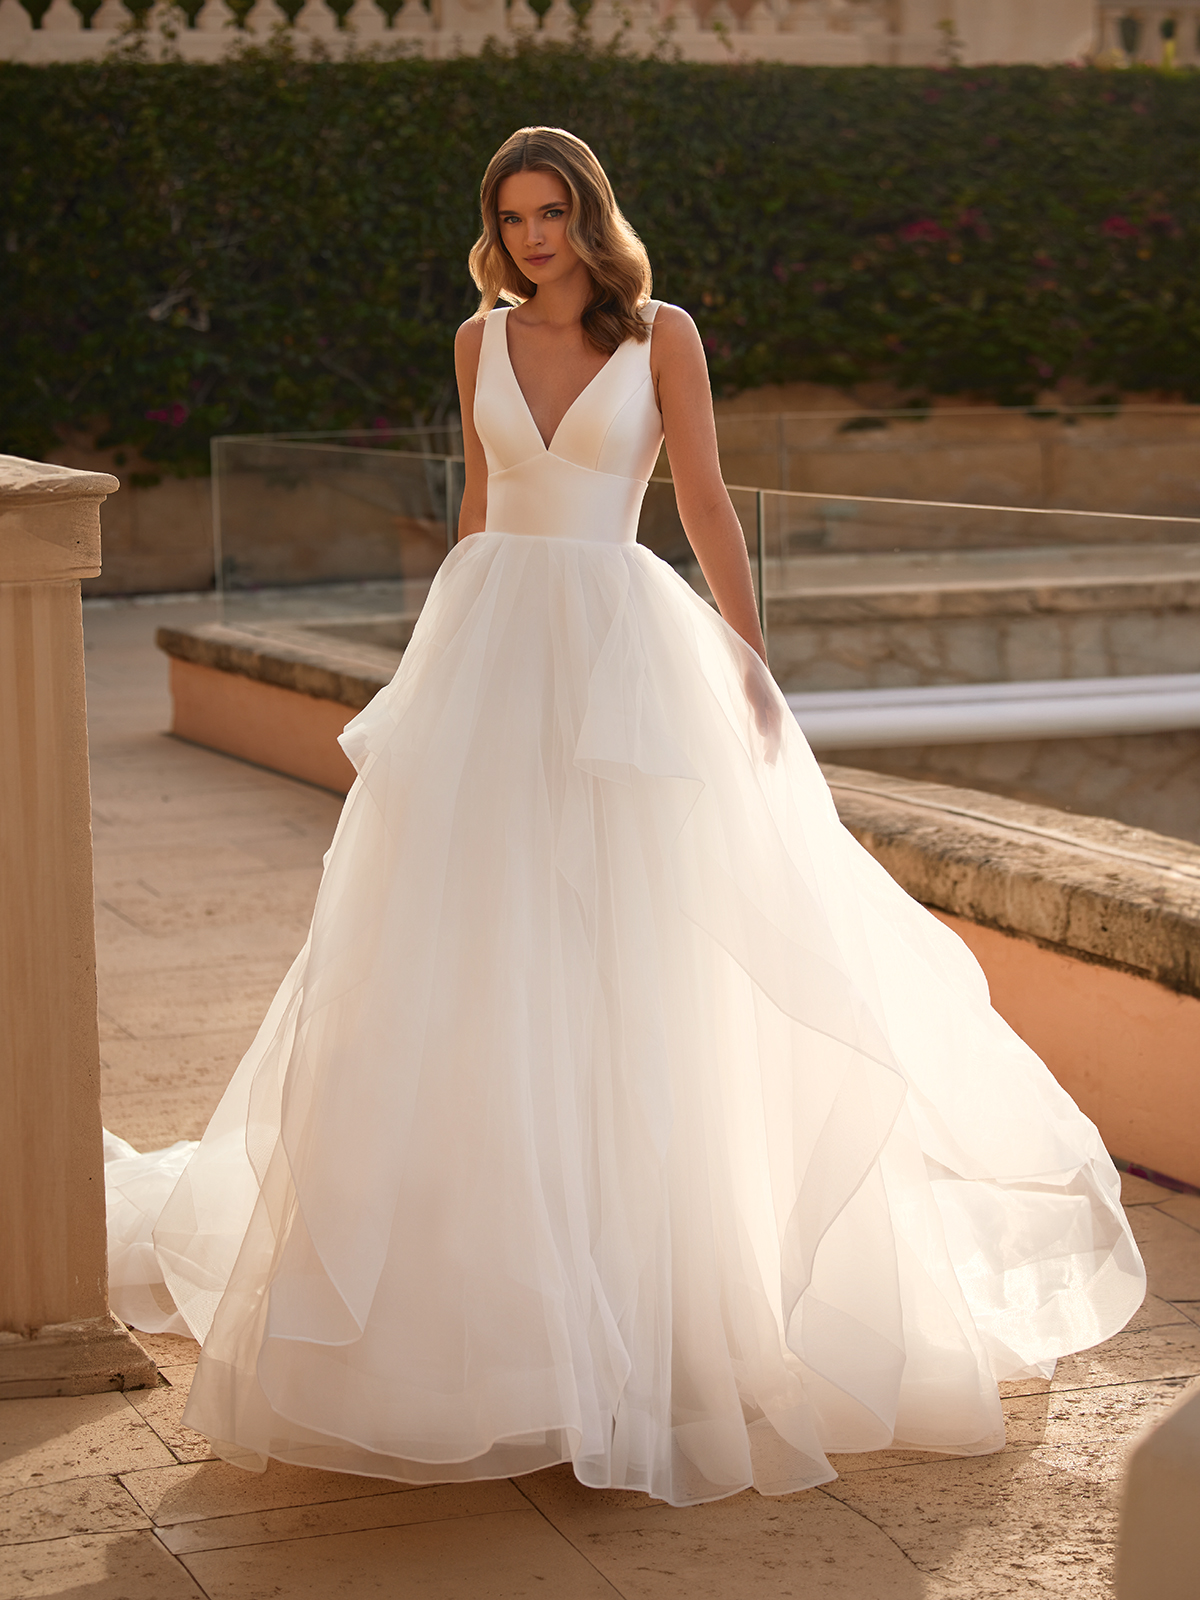 Ball Gown vs A-Line Wedding Dresses - What's The Difference?